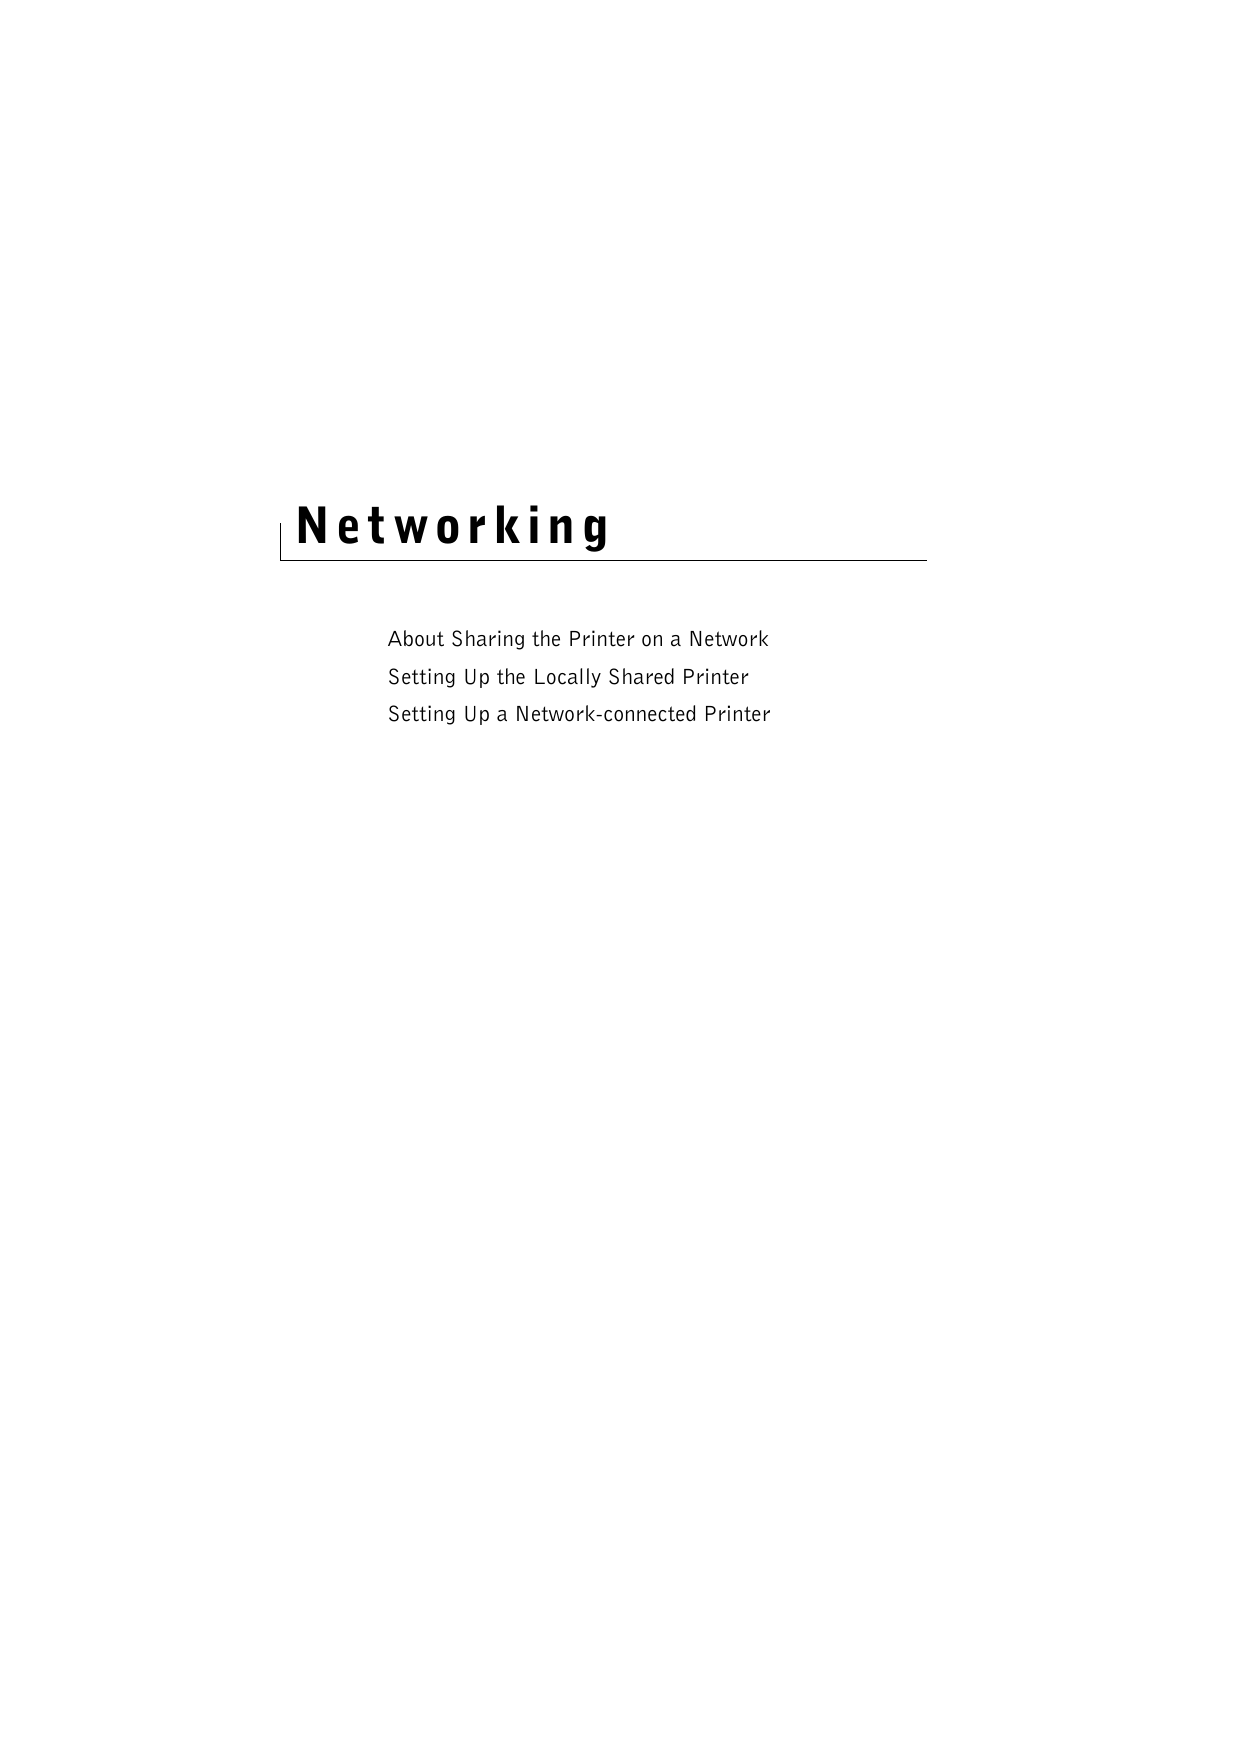 NetworkingAbout Sharing the Printer on a NetworkSetting Up the Locally Shared PrinterSetting Up a Network-connected Printer